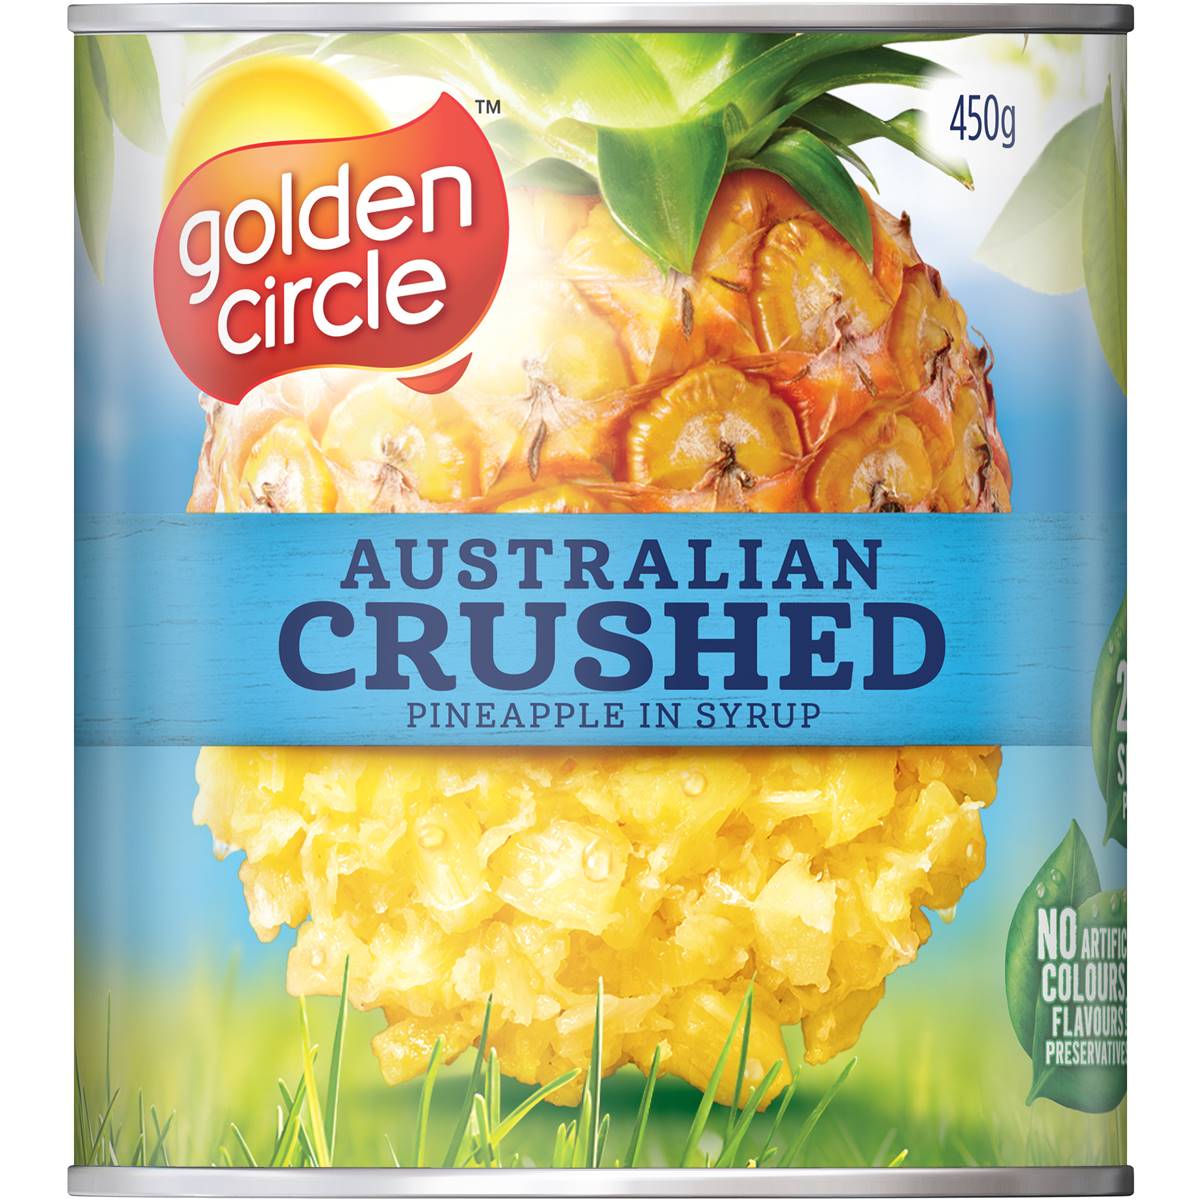 Golden Circle Pineapple Crushed in syrup 450g